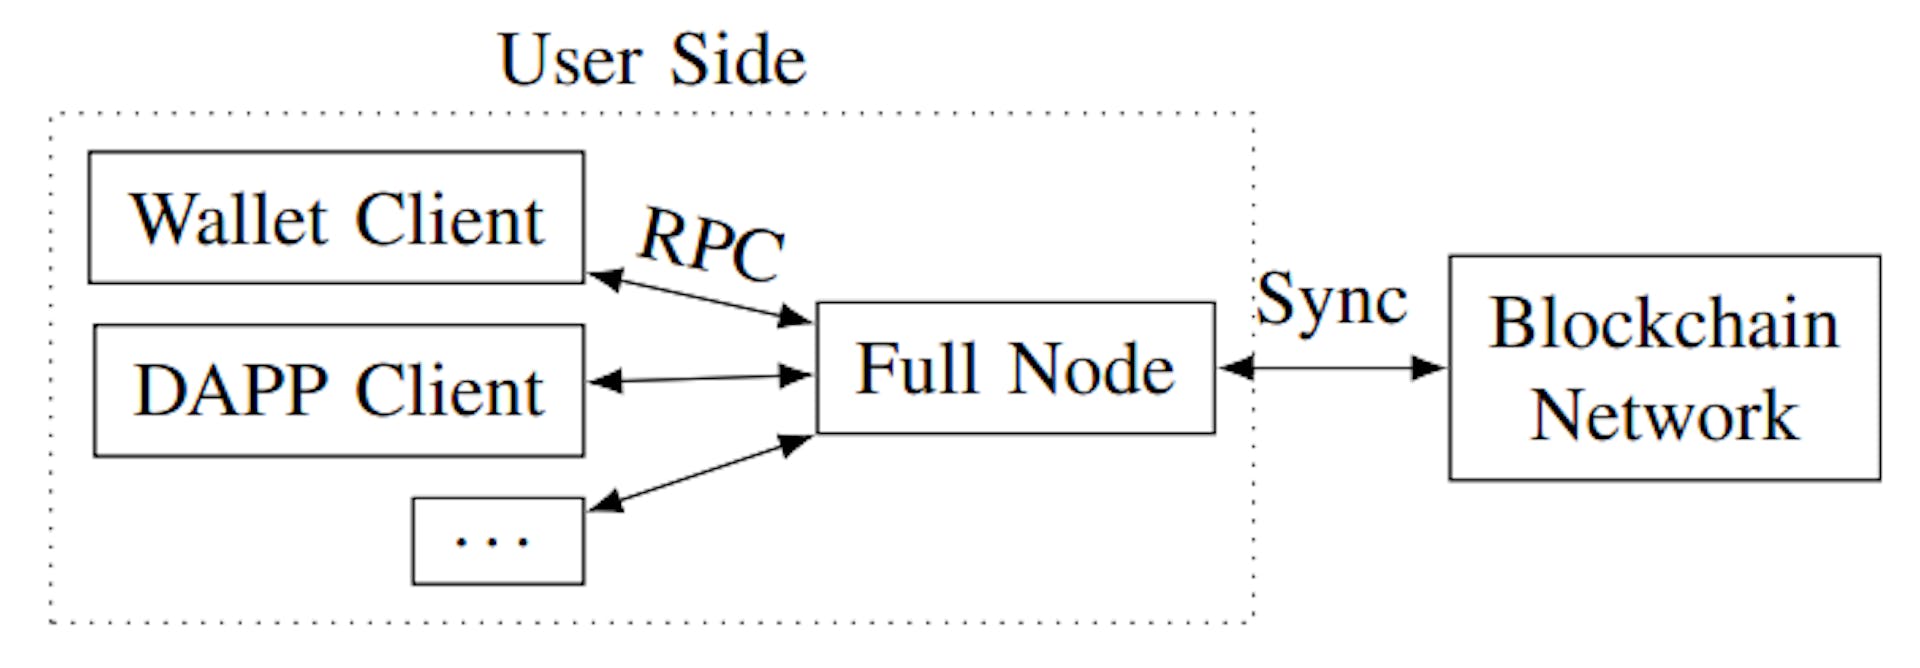 Fig. 2. Example of a user interacting with a full node they own via RPC. The full node constantly synchronizes with nodes in the blockchain network to keep track of information on the ledger. Different clients use RPC to interact with the node to query information about the blockchain.